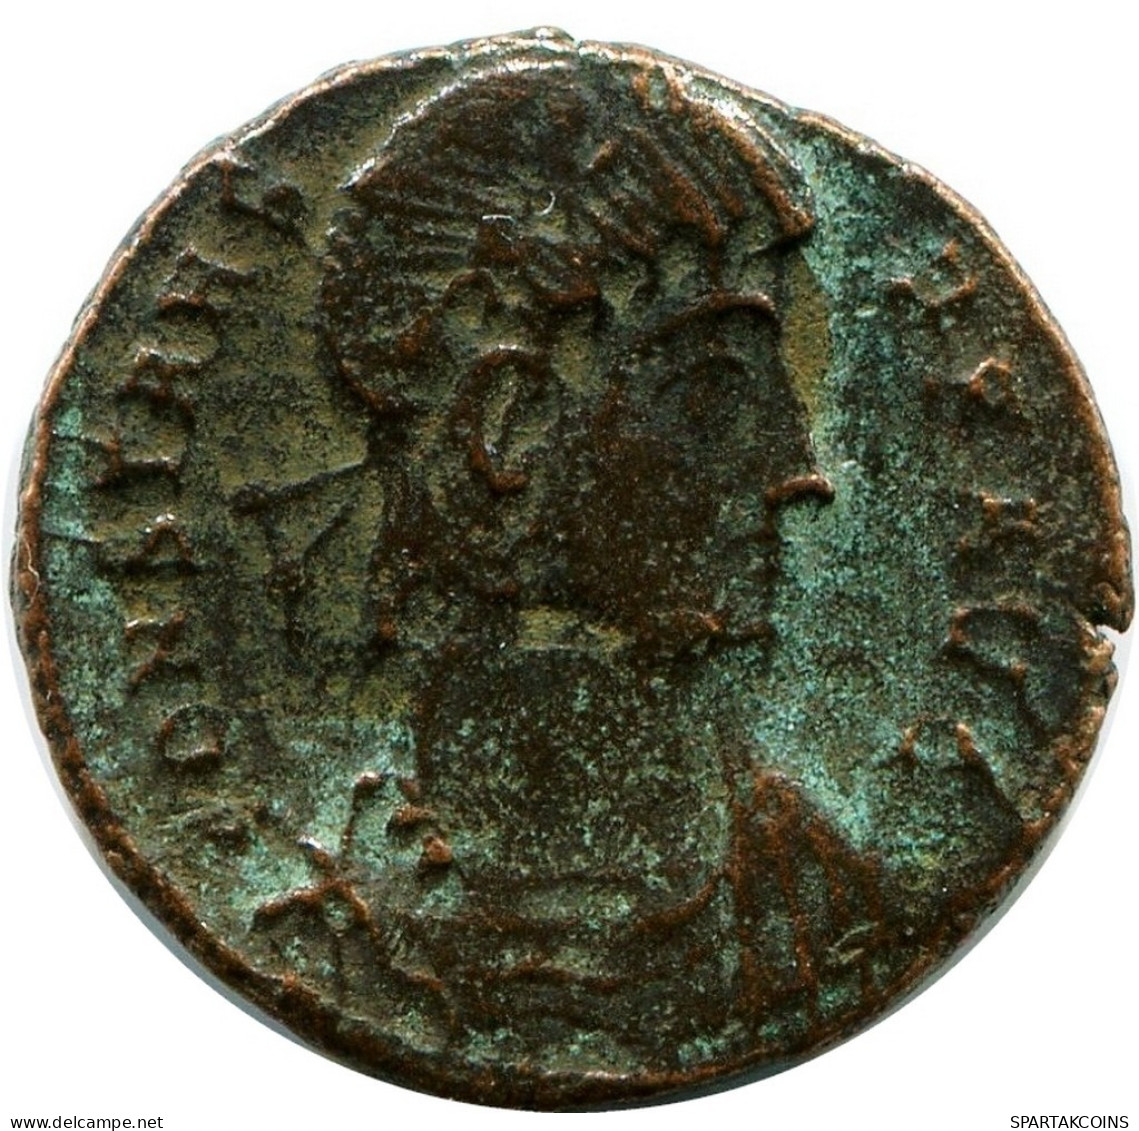 CONSTANS MINTED IN THESSALONICA FOUND IN IHNASYAH HOARD EGYPT #ANC11895.14.E.A - El Impero Christiano (307 / 363)